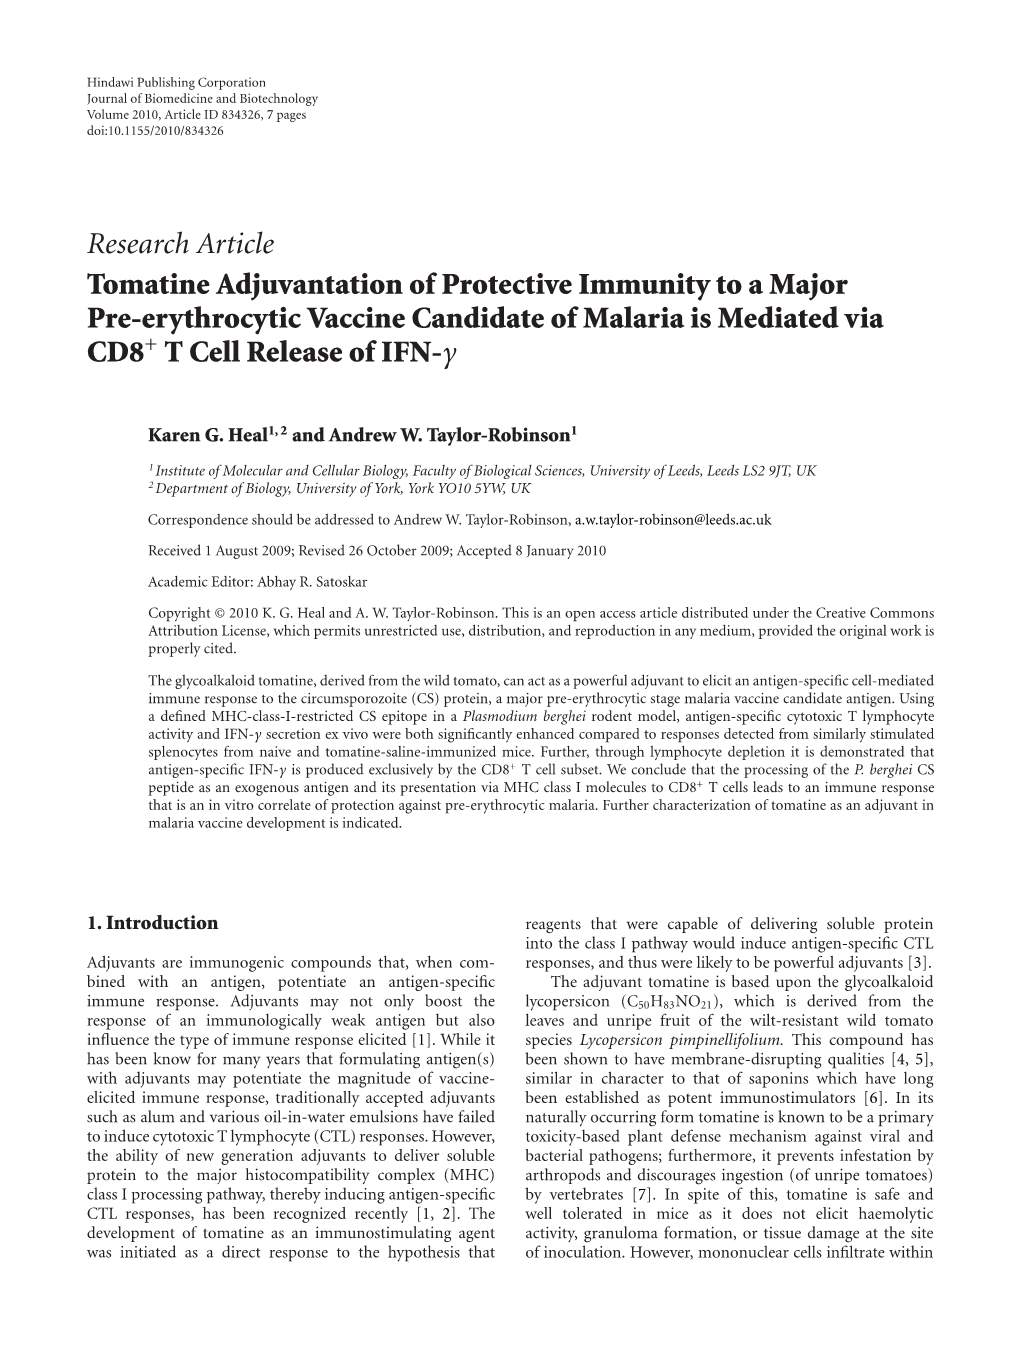 Tomatine Adjuvantation of Protective Immunity to a Major Pre-Erythrocytic Vaccine Candidate of Malaria Is Mediated Via CD8+ T Cell Release of IFN-Γ